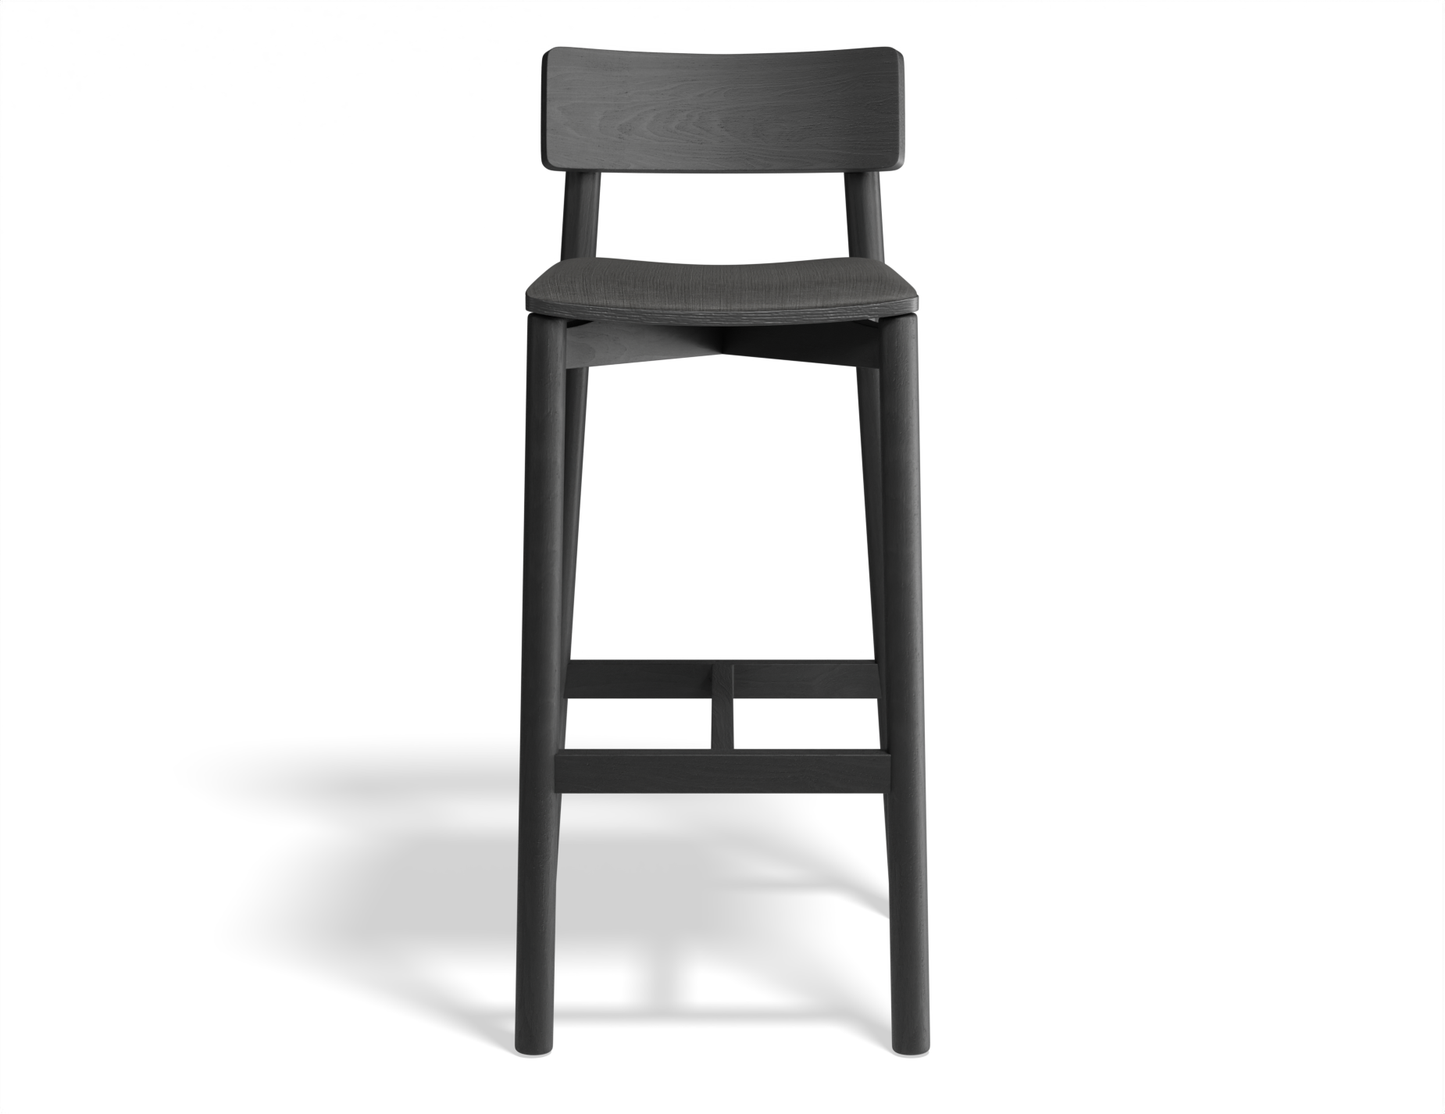 Riviera Bar Stool Black Ash with upholstered padded seat